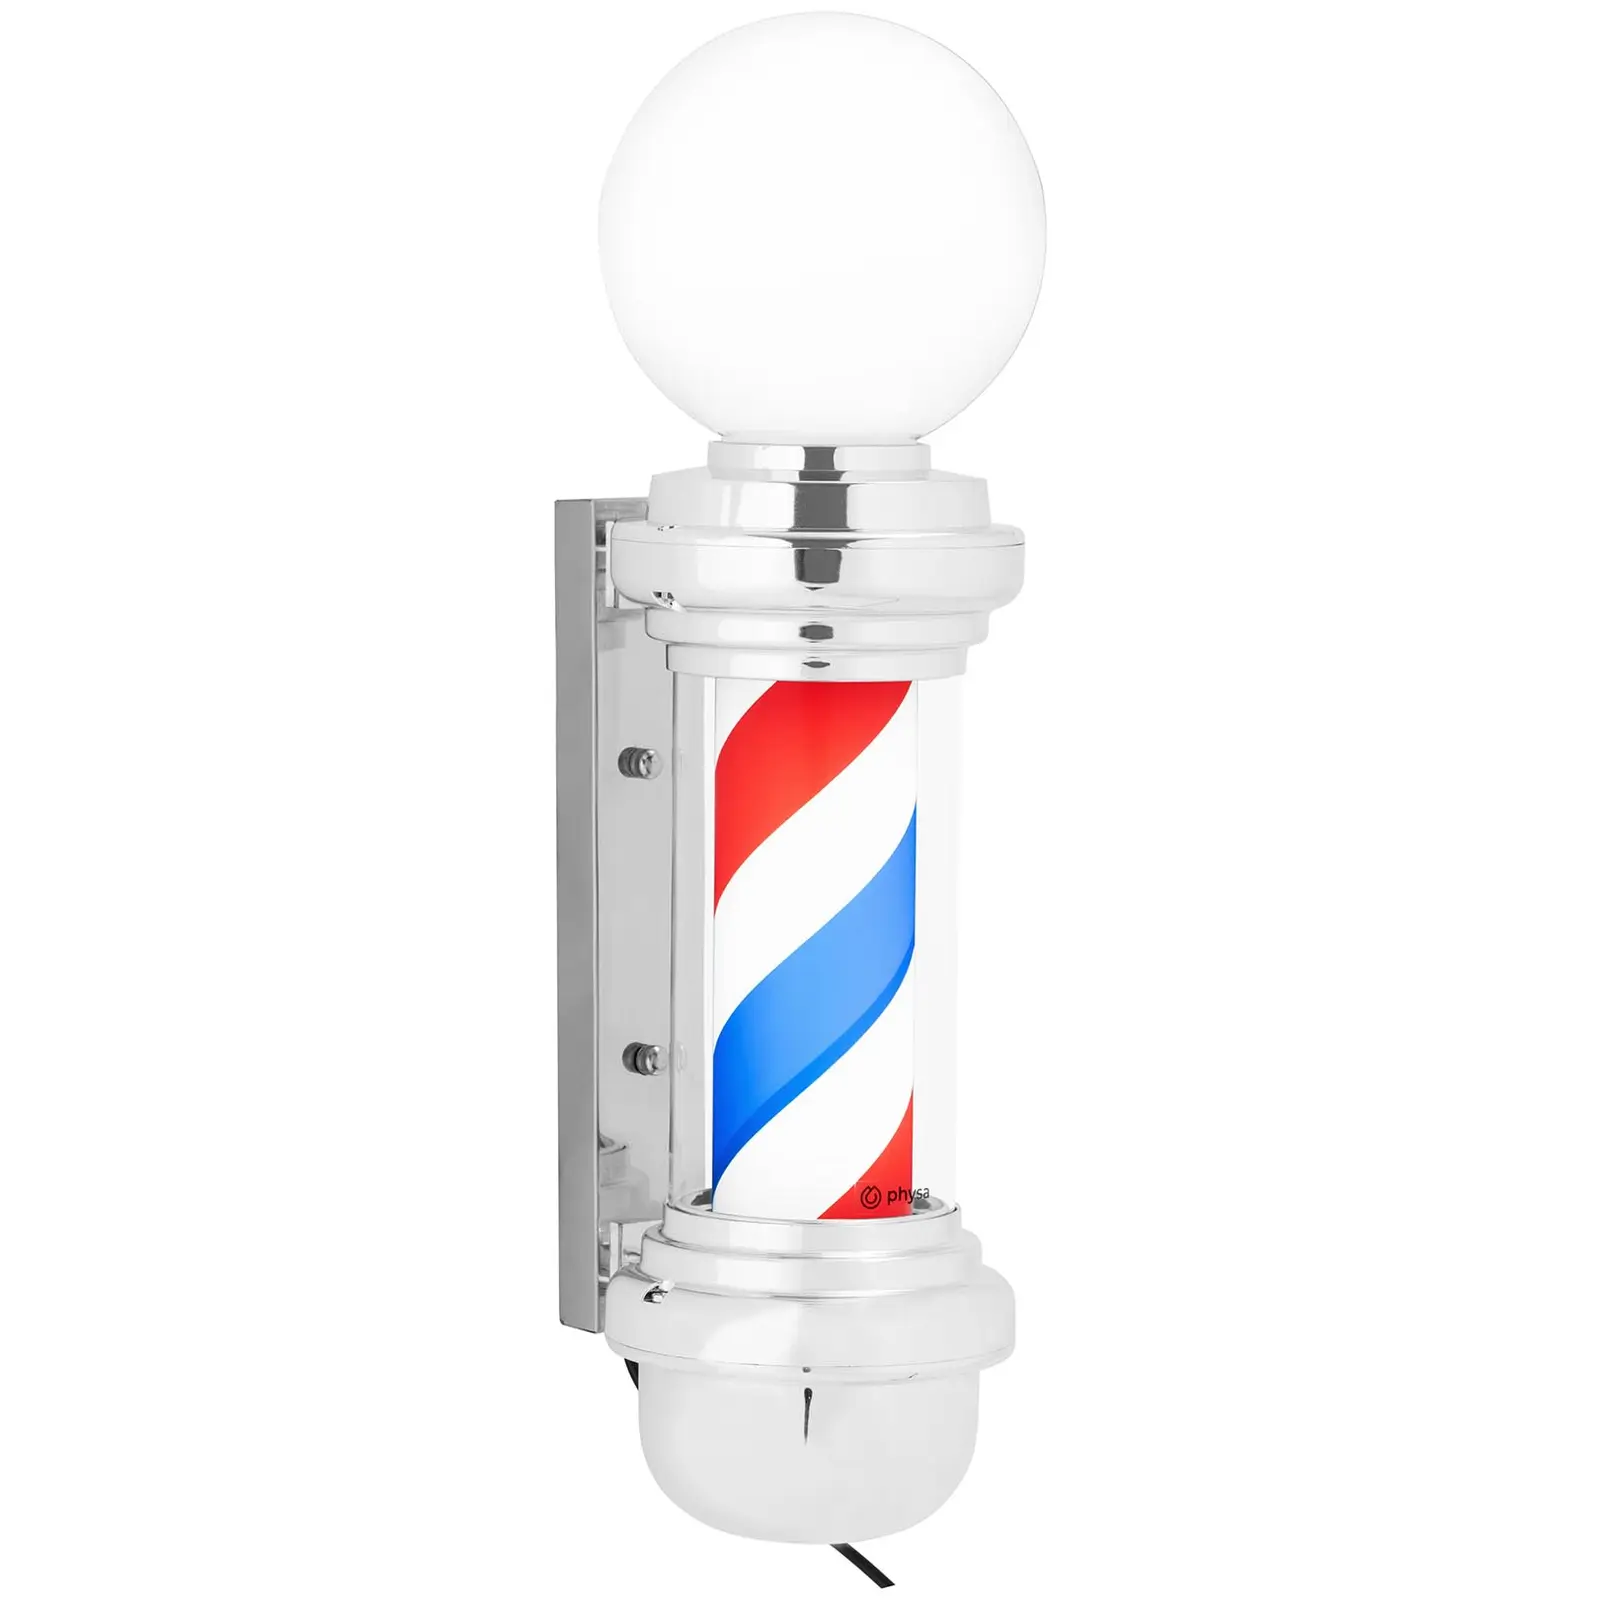 Barber Pole - rotates and illuminates - 280 mm height - 25 cm from the wall - silver frame